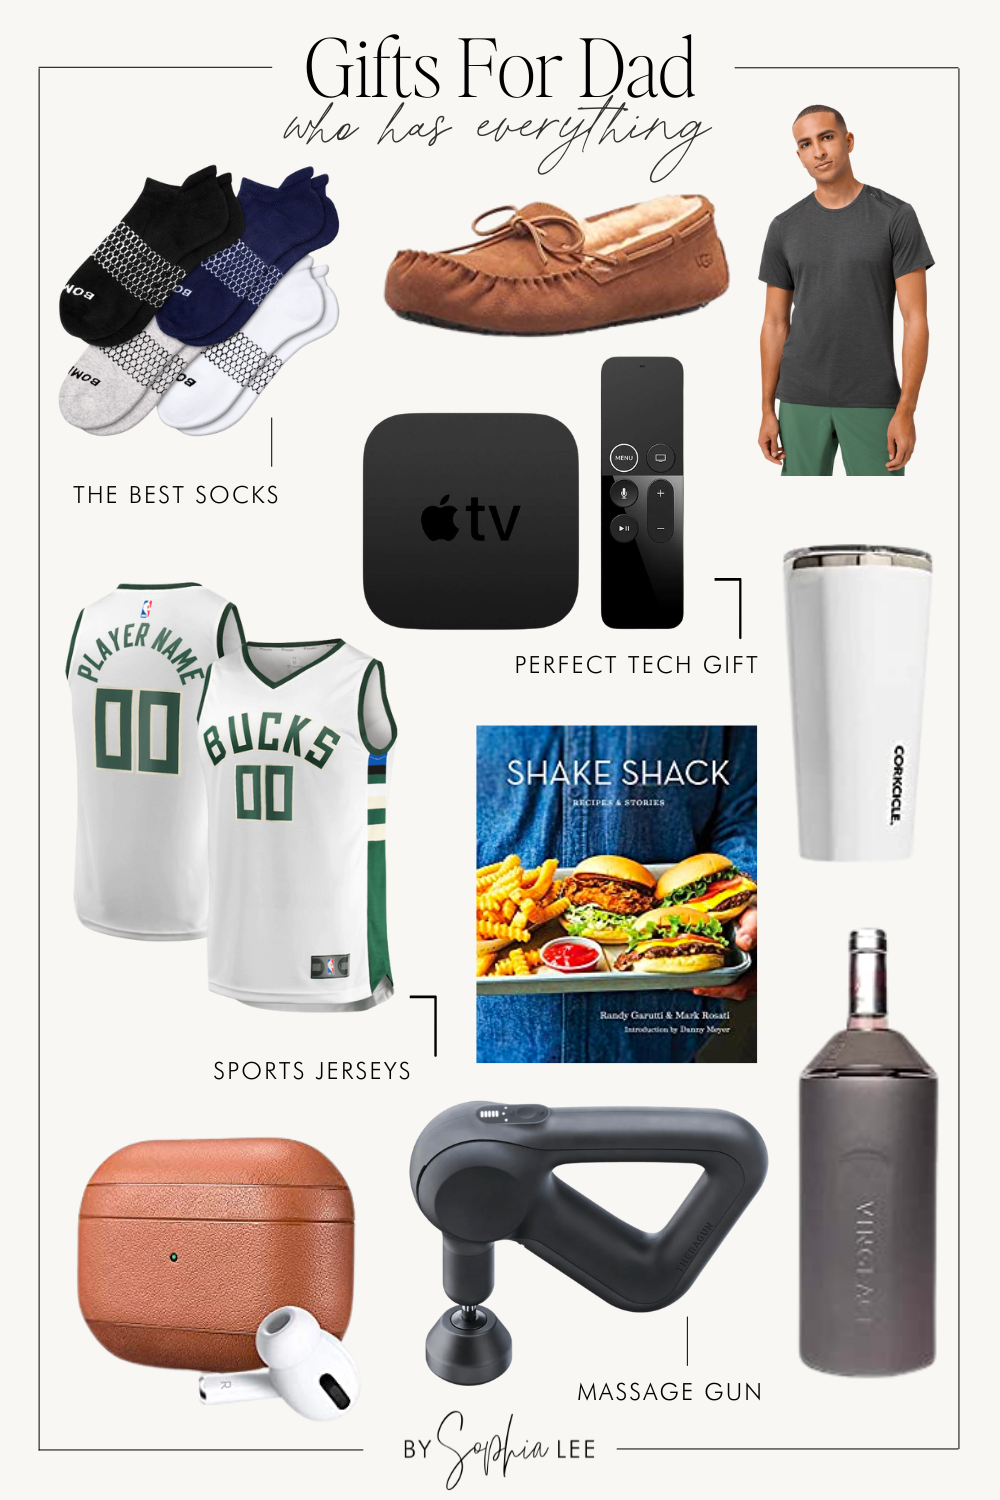 gifts for dad who has everything